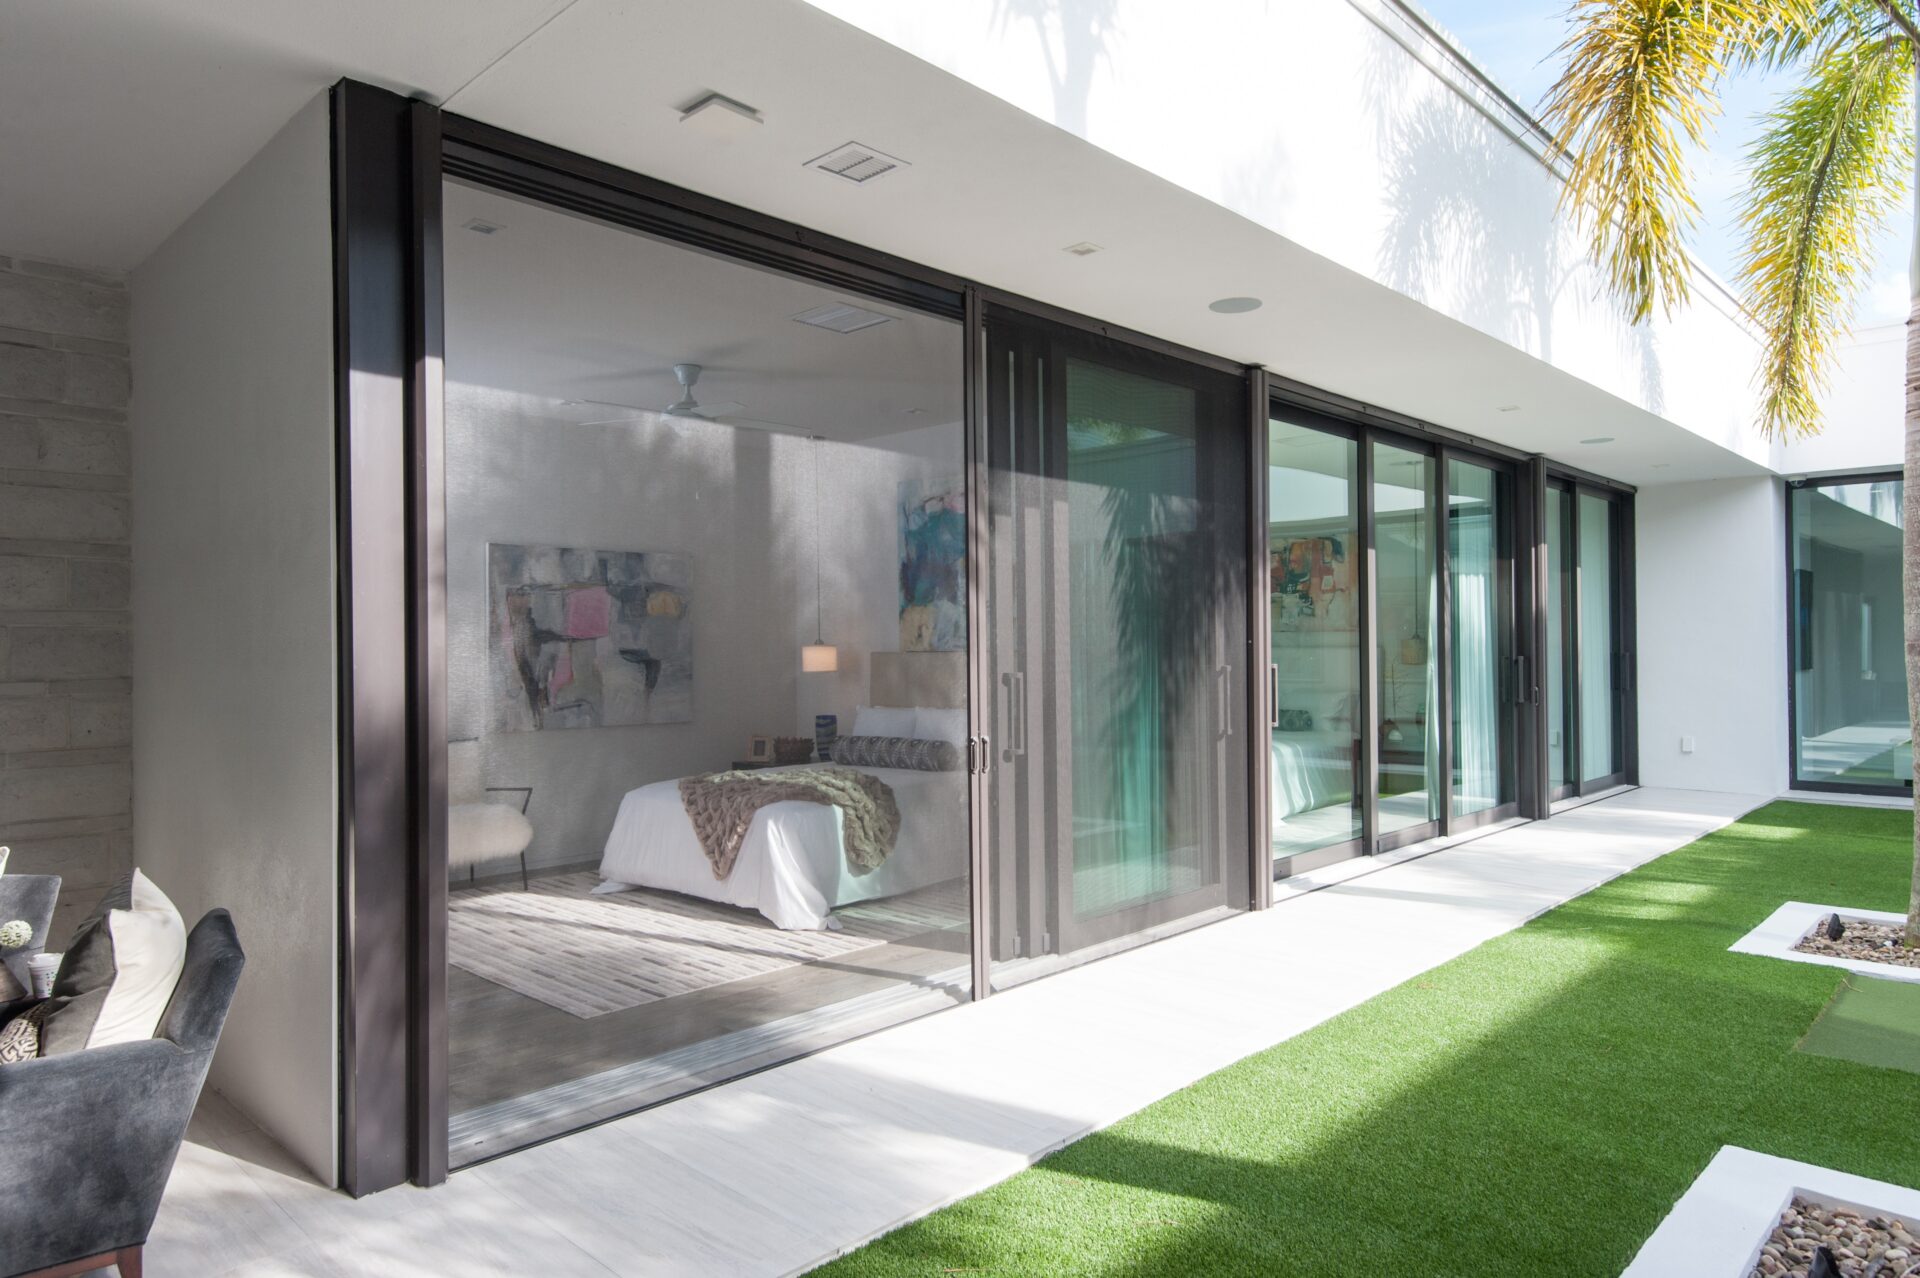 Phantom's Extra-Large Retractable Wall Screen Door spans up to fifteen feet wide per unit and is perfect for bi-fold doors, sliding and folding door systems, and large patio openings.